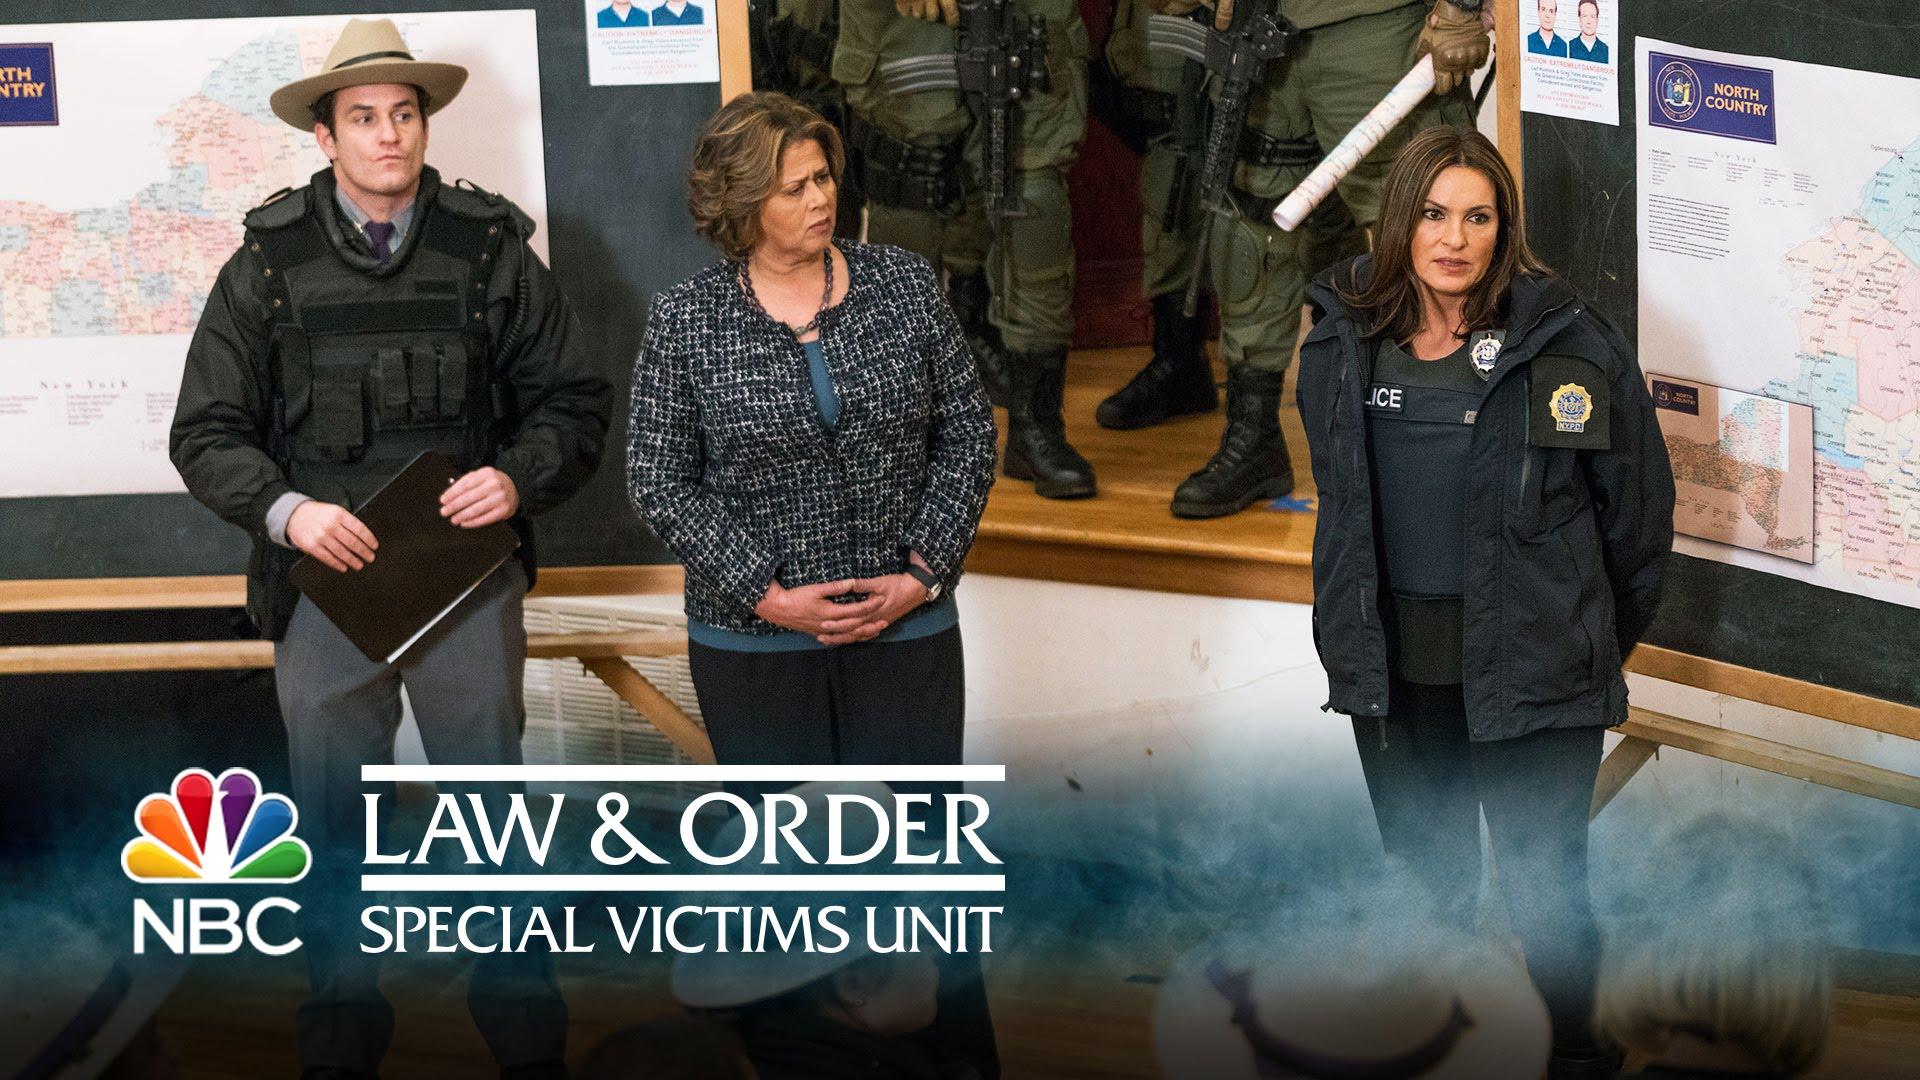 Wallpaper Blink of Law & Order: Special Victims Unit